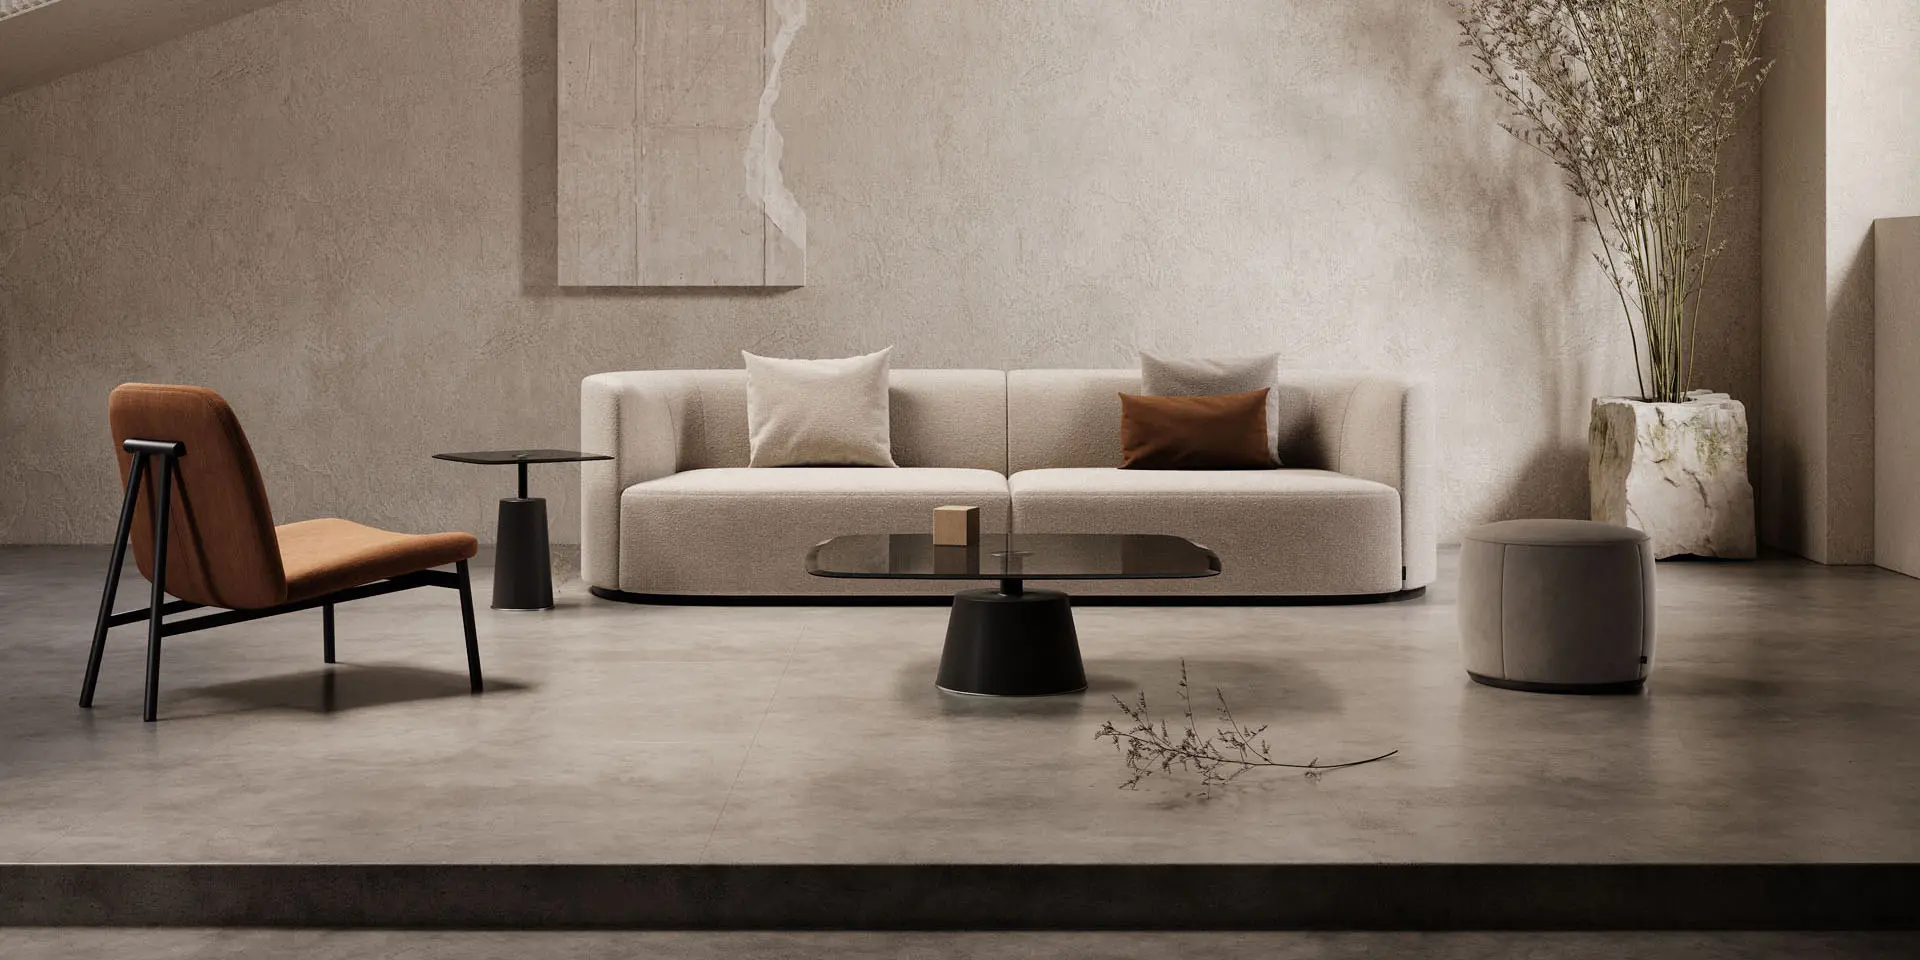 designer c-shaped classic sofa to add luxury into your living room, coffee table placed in the centre, rug